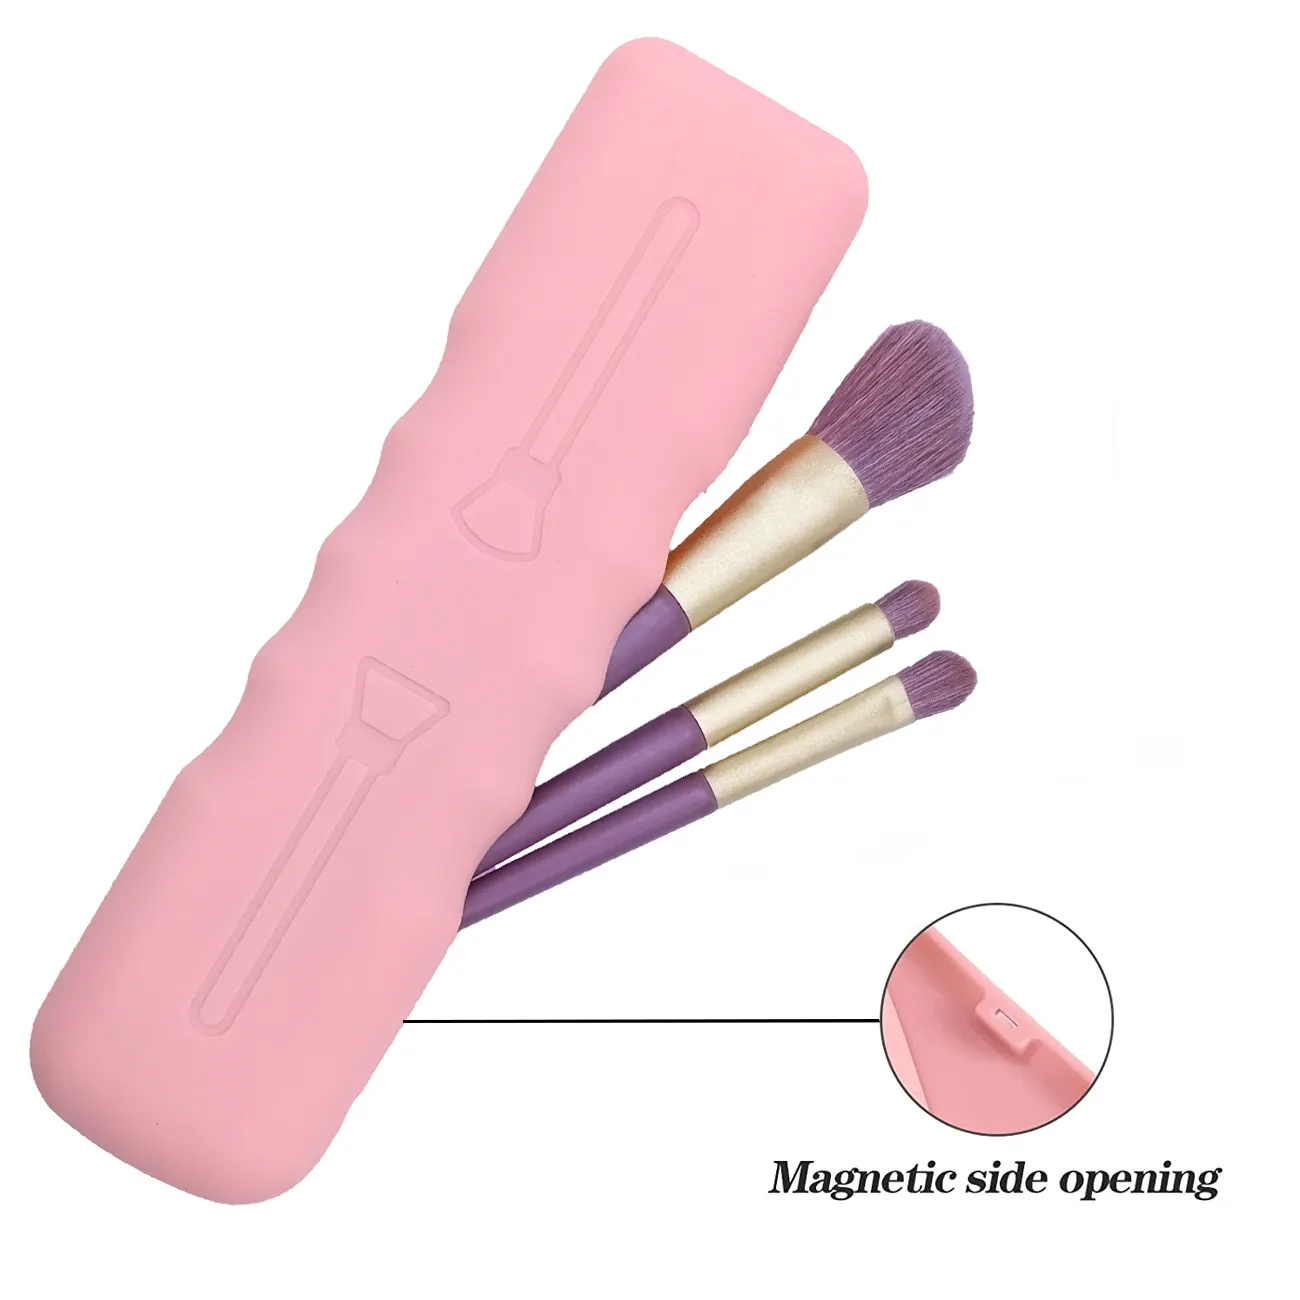 WaterProof Makeup Brush Travel Holder Silicone Toiletry Makeup Kit Pouch Makeup Brush Case with Magnetic Snaps